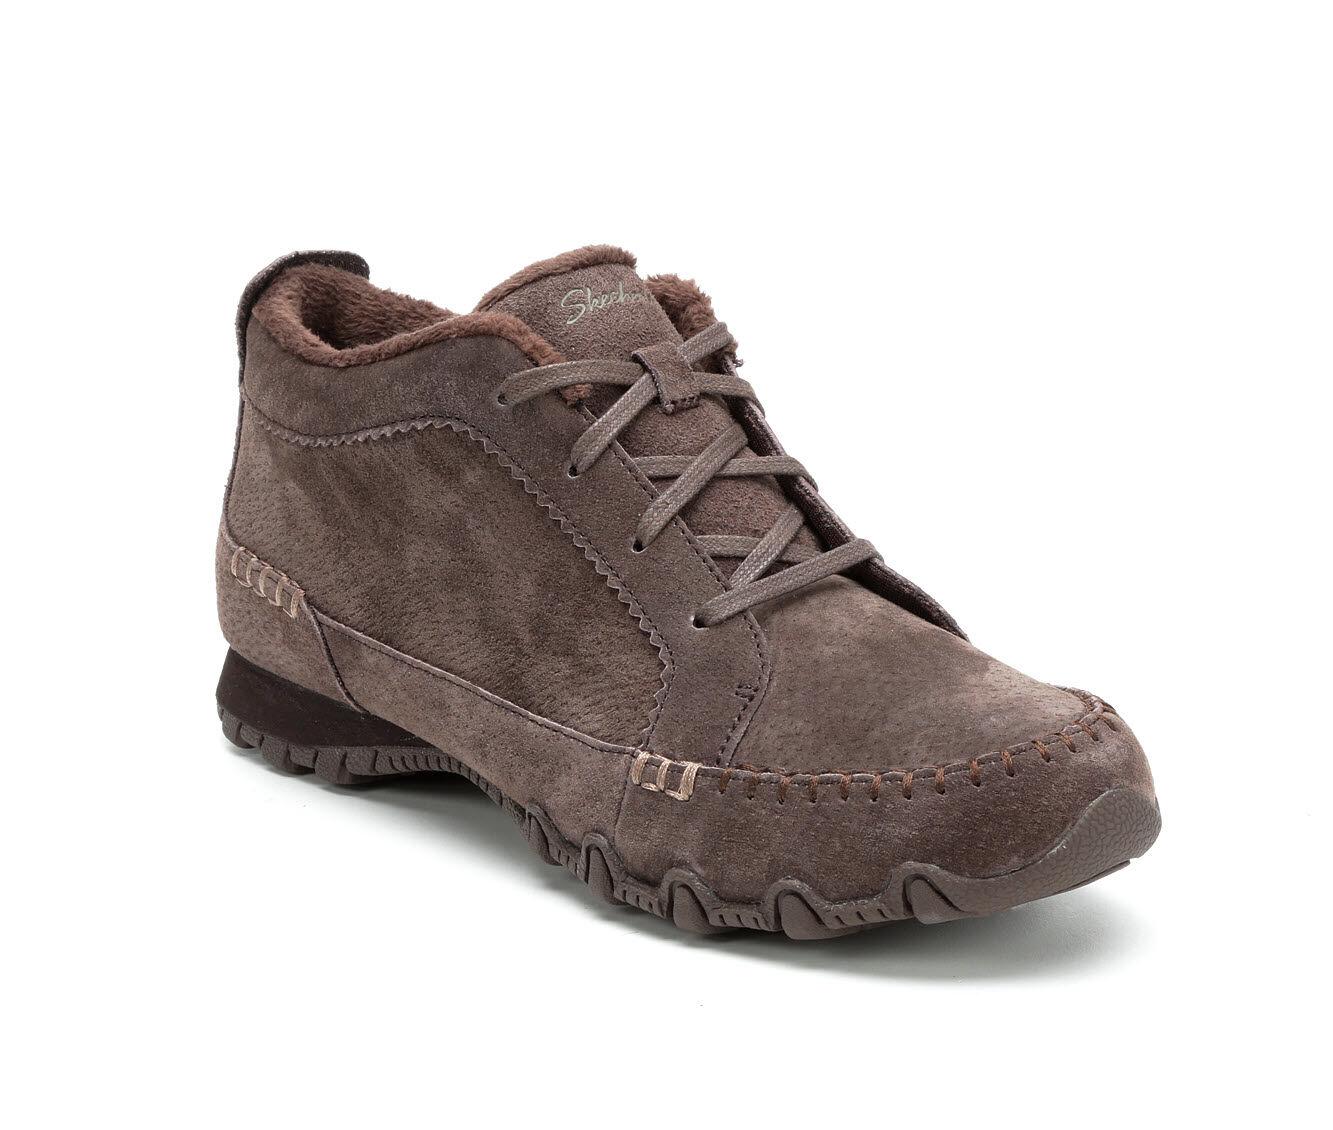 Skechers Suede Lineage 44706 Shoe in Chocolate (Brown) - Lyst